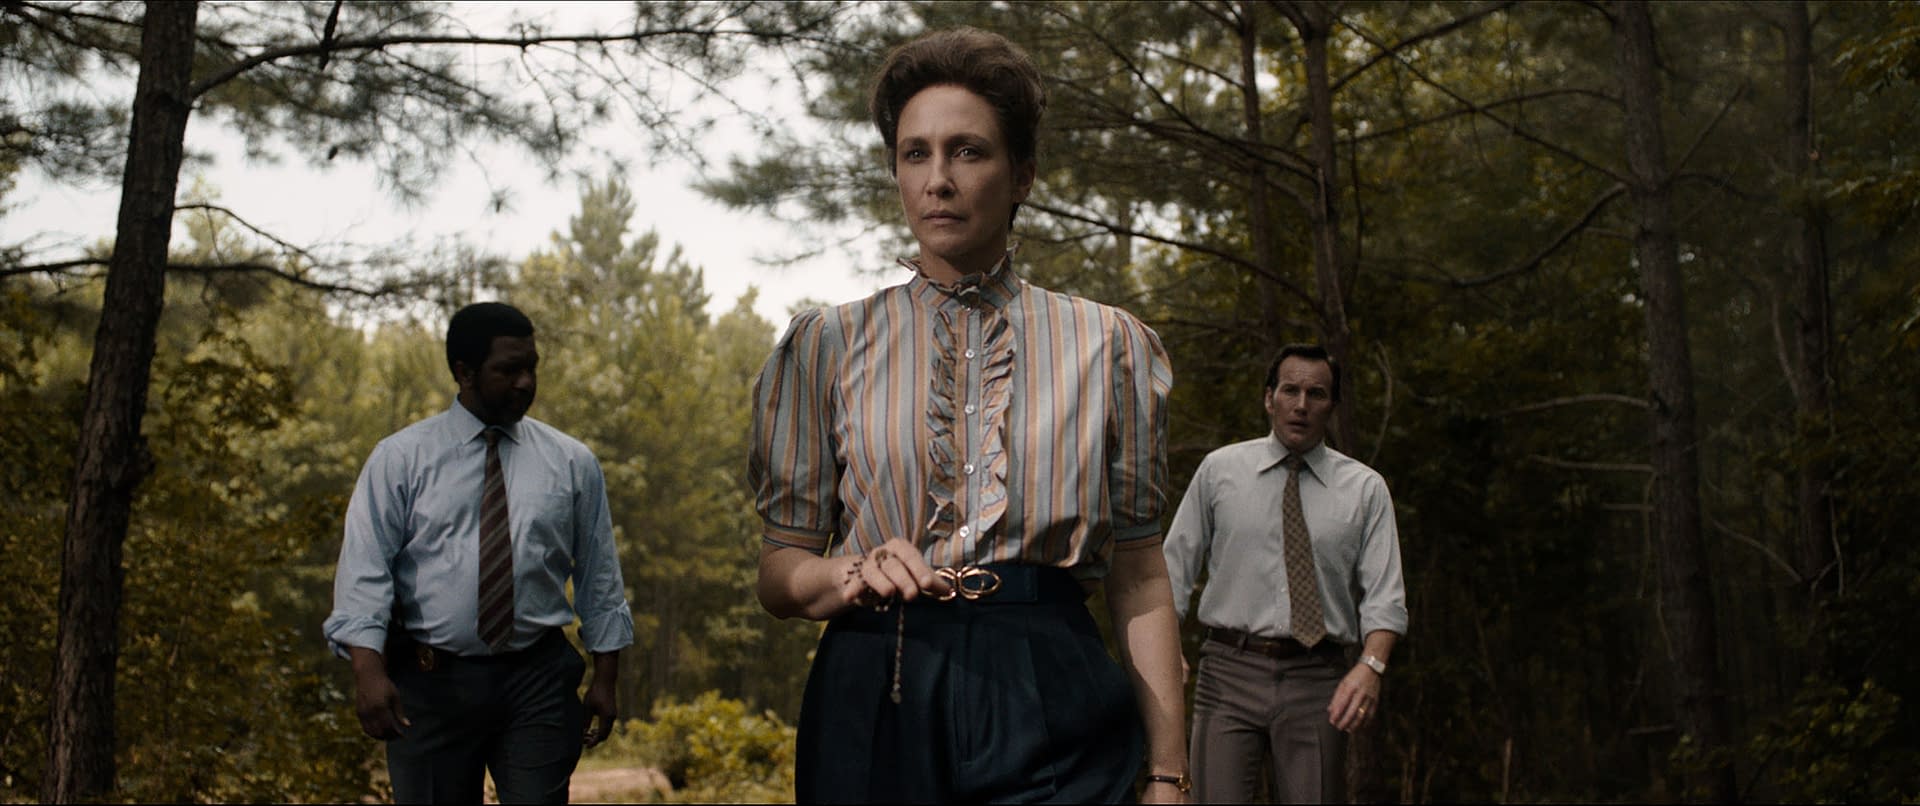 The Conjuring: The Devil Made Me Do It Drops A Ton Of New Images